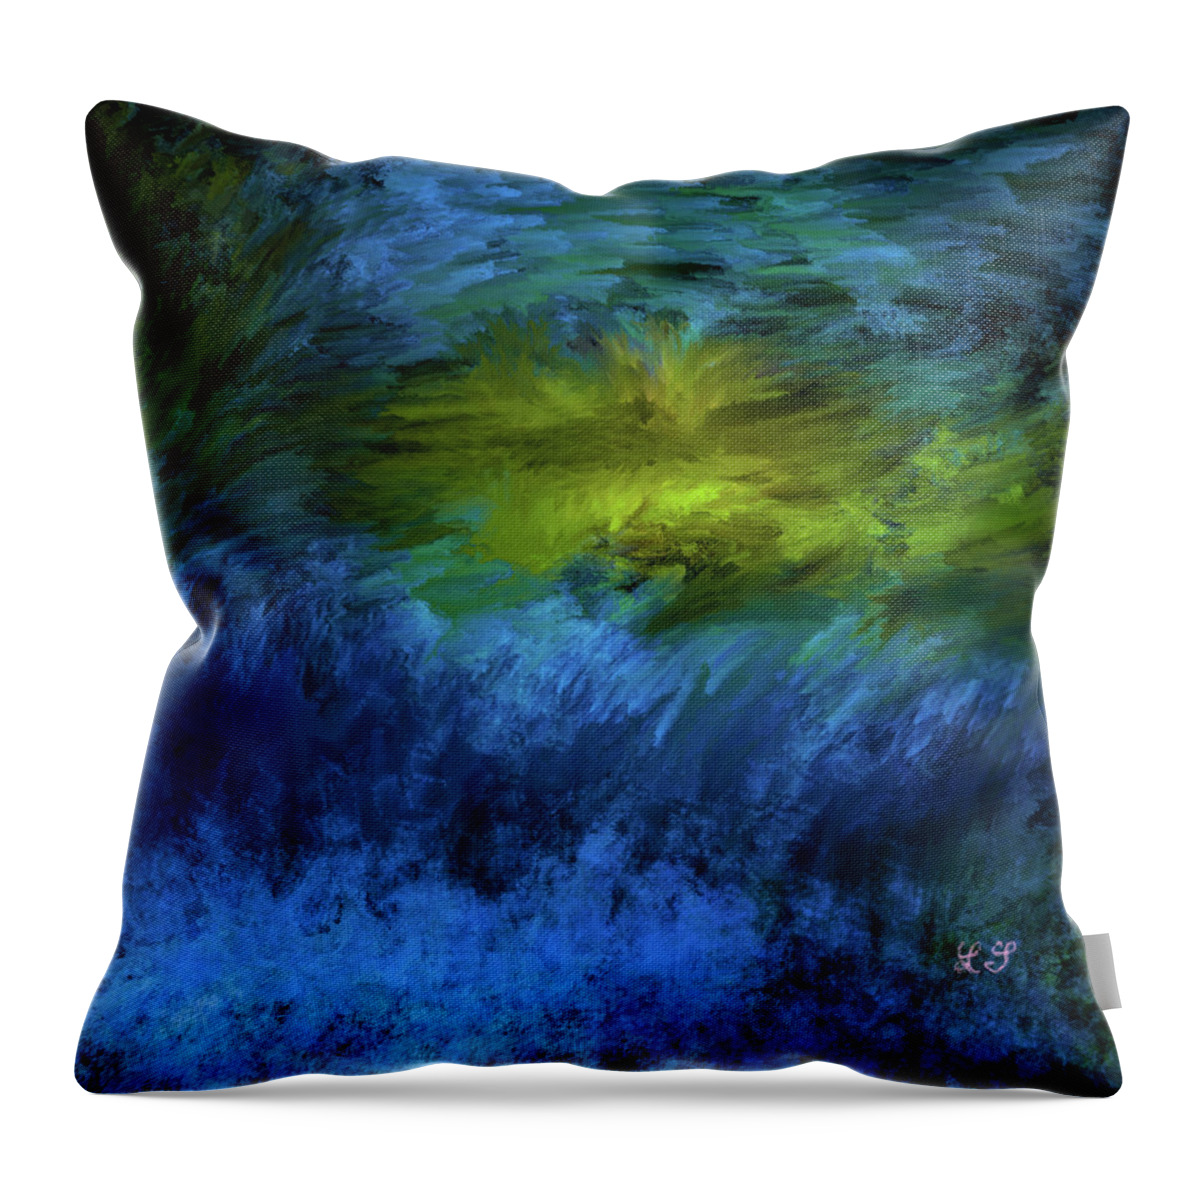 Stormy Dreams Throw Pillow featuring the digital art Stormy dreams #j4 by Leif Sohlman